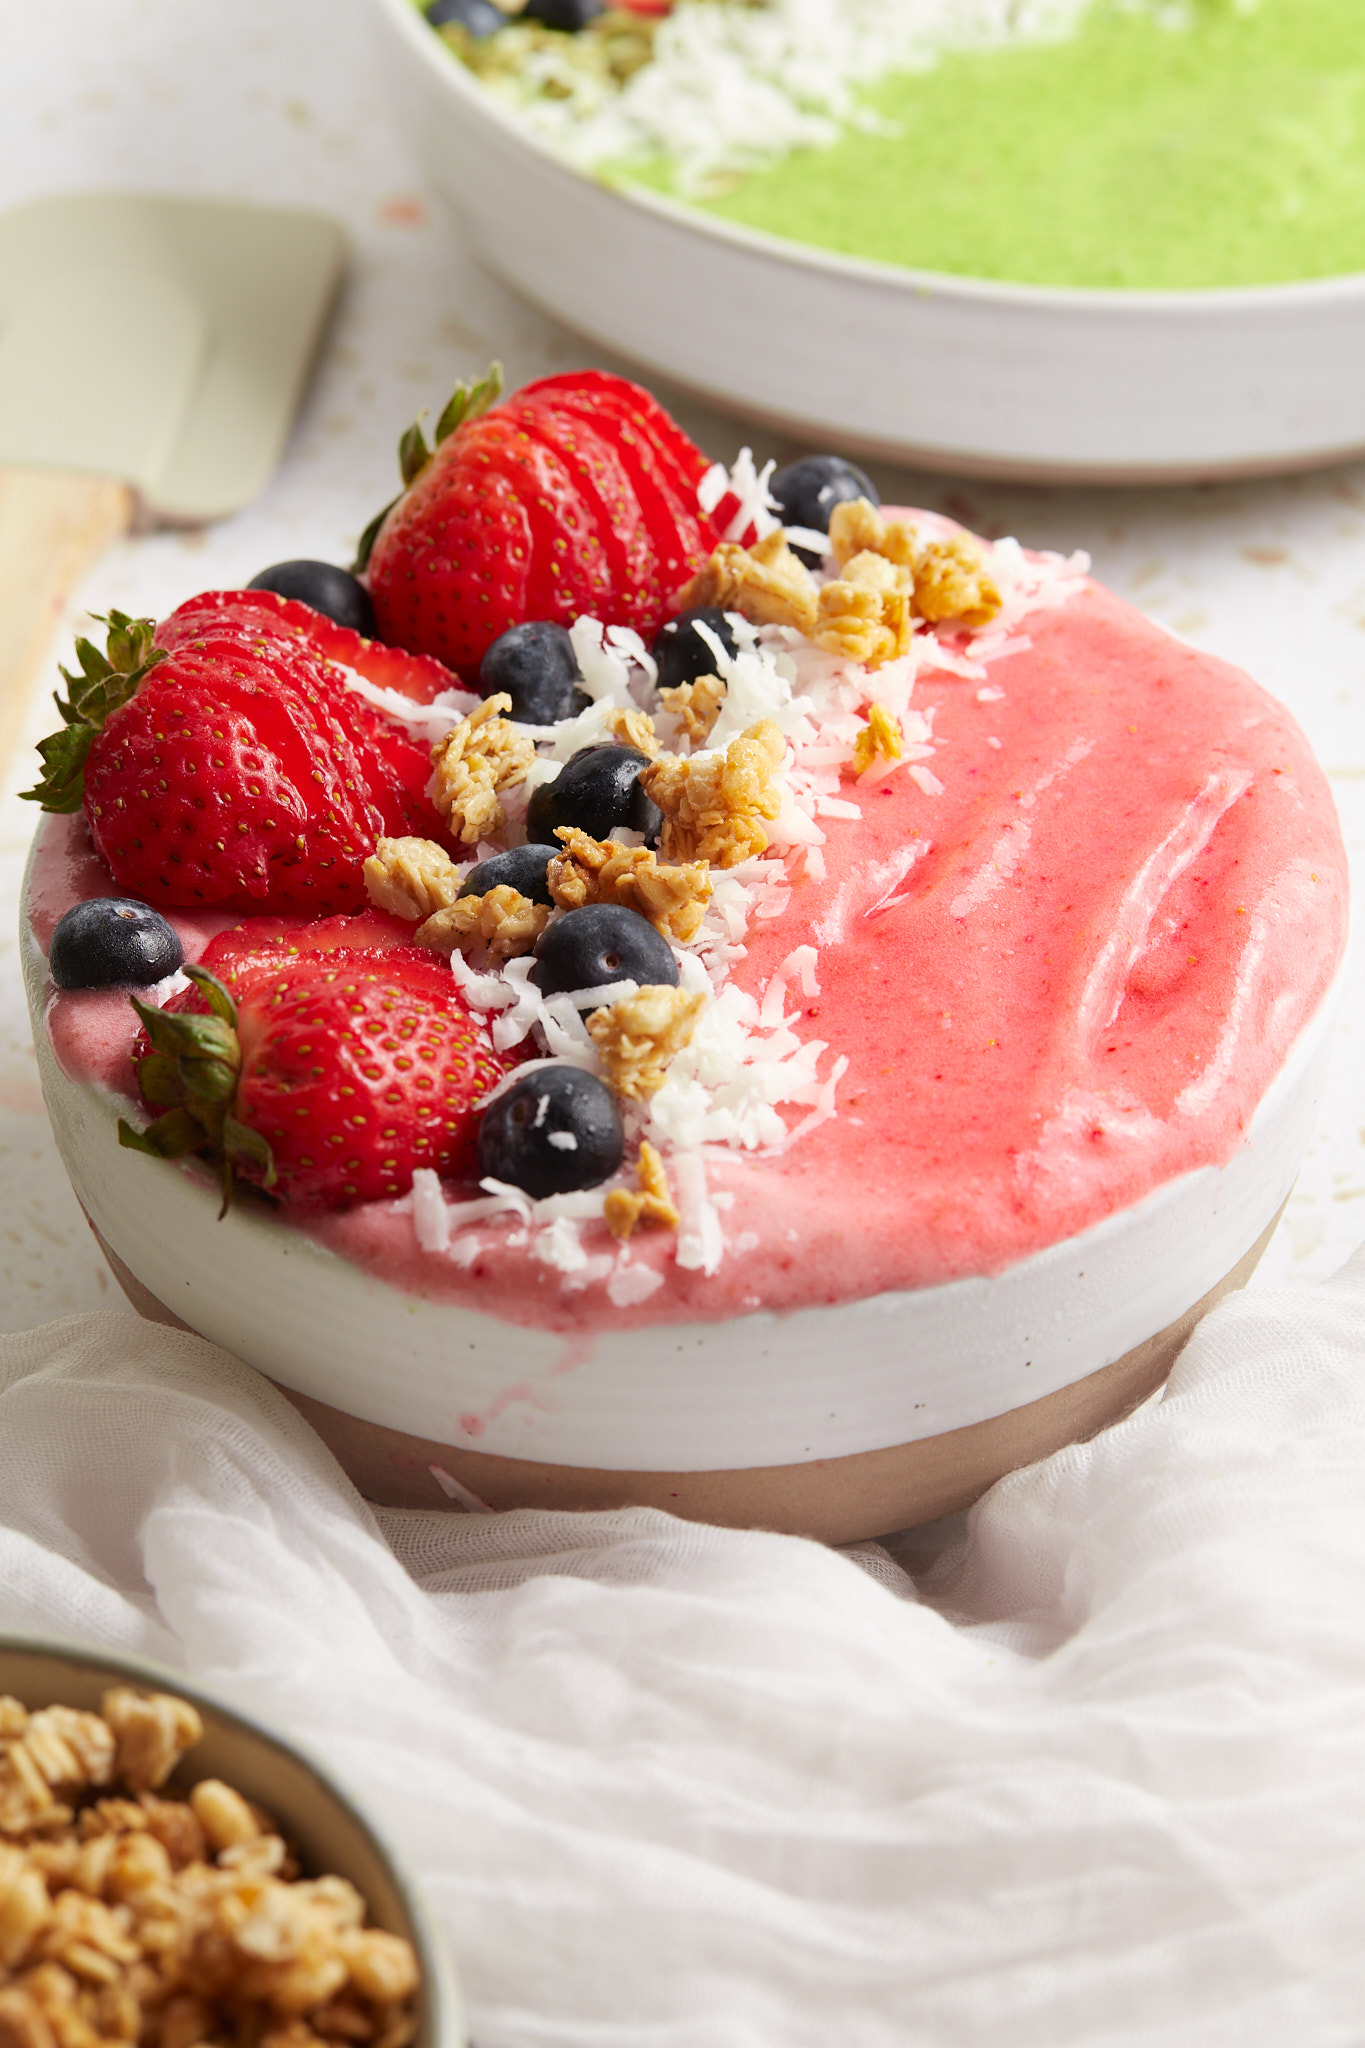 A strawberry banana smoothie bowl topped with strawberries, blueberries, coconut, and nuts.